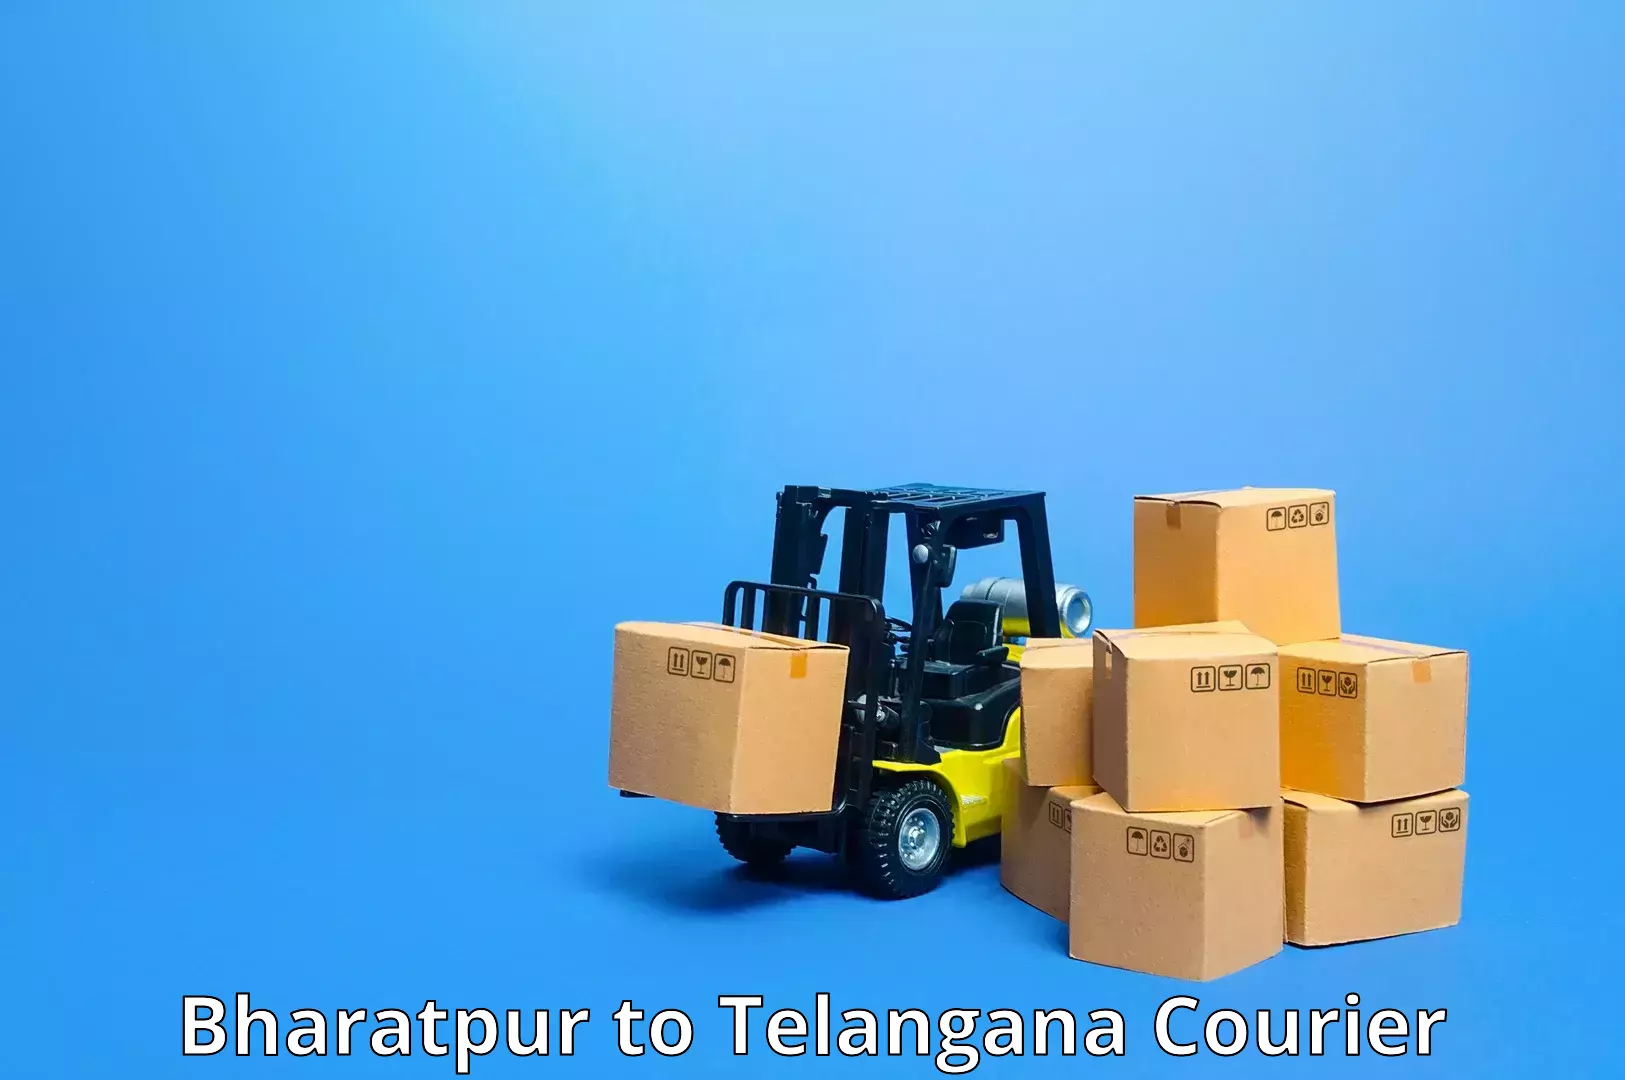 Flexible delivery scheduling in Bharatpur to Secunderabad